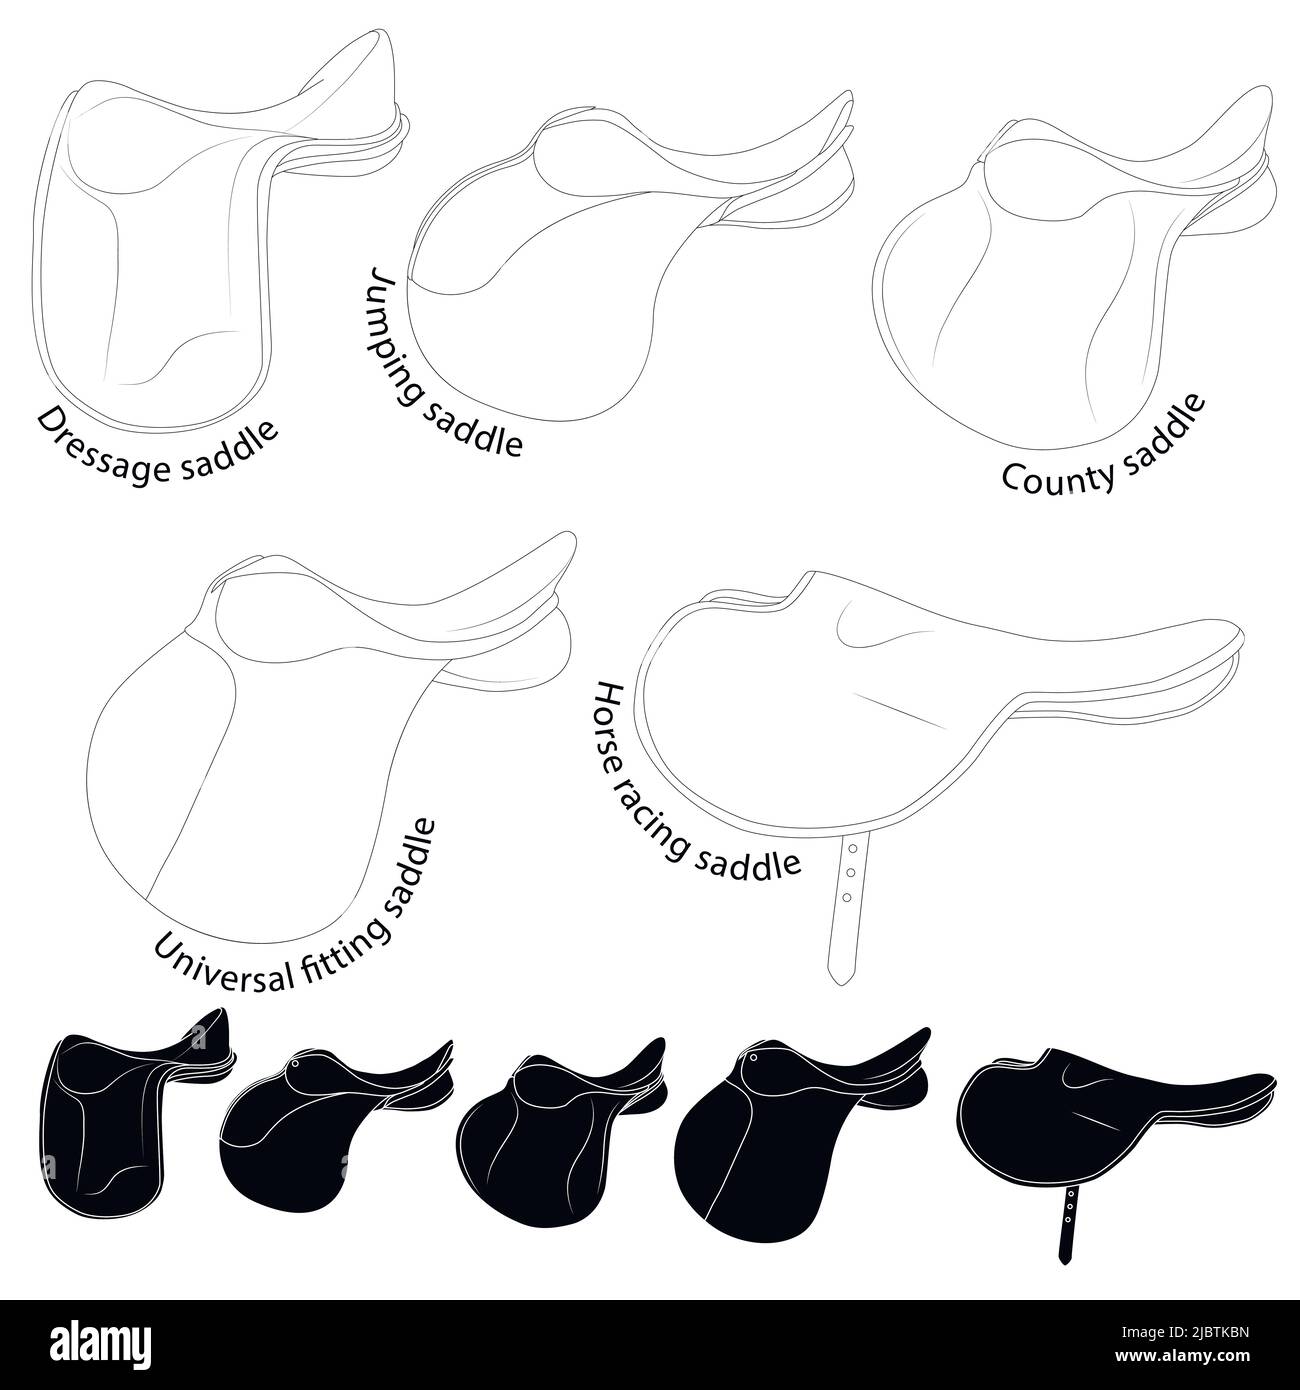 Saddles for riding. Black and white illustration types of saddles. Similarities and differences for study in specialized educational institutes. Stock Vector